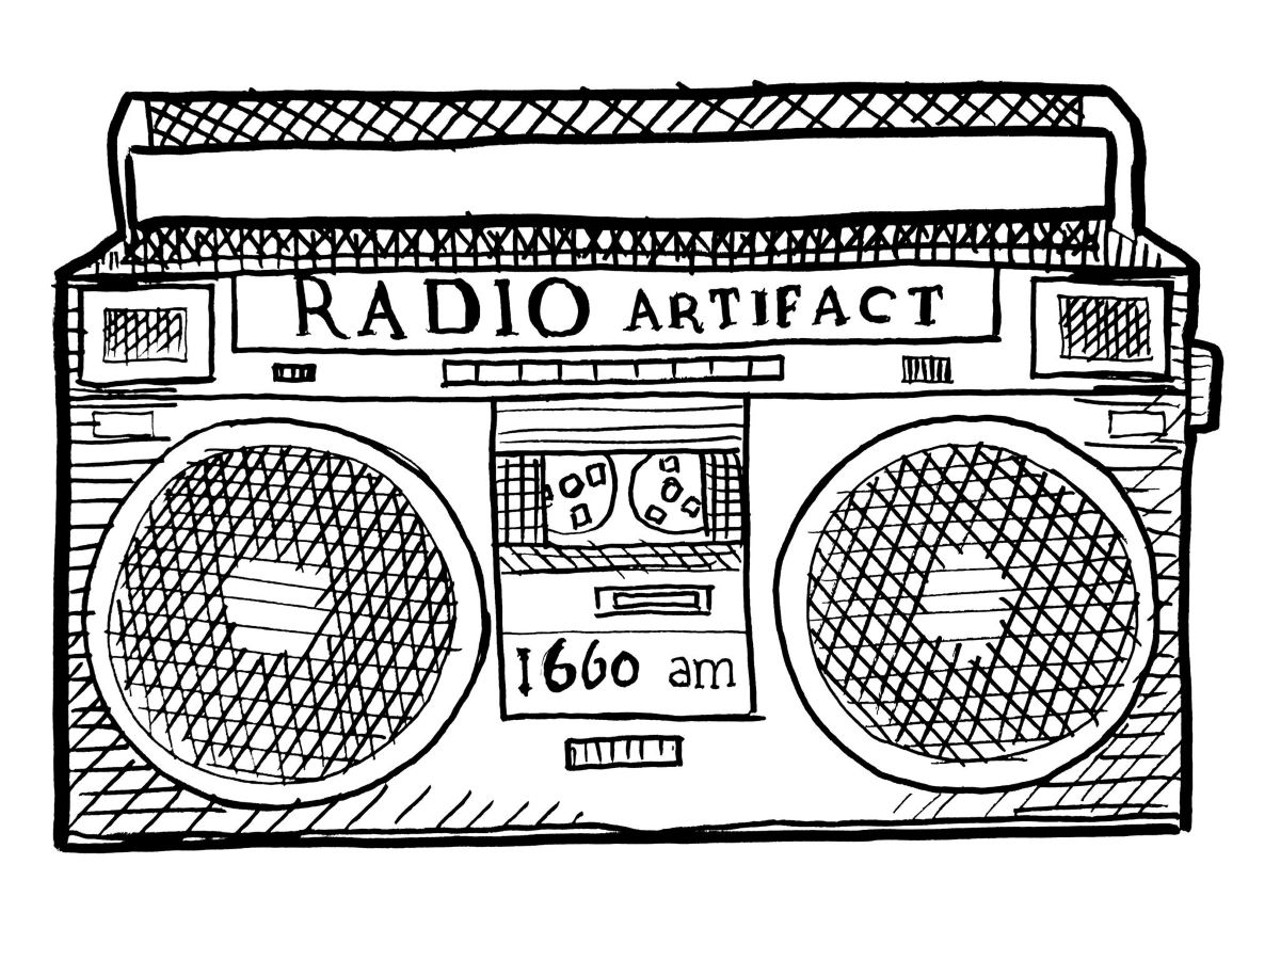 Cincy Goes Acoustic
When: Dec. 16 at 7:30 p.m.
Where: Radio Artifact, Northside
What: Live music
Who: Radio Artifact and Urban Artifact
Why: Performances by Veronica Grim, Rtist, St Mary, St Michael and Life in Idle